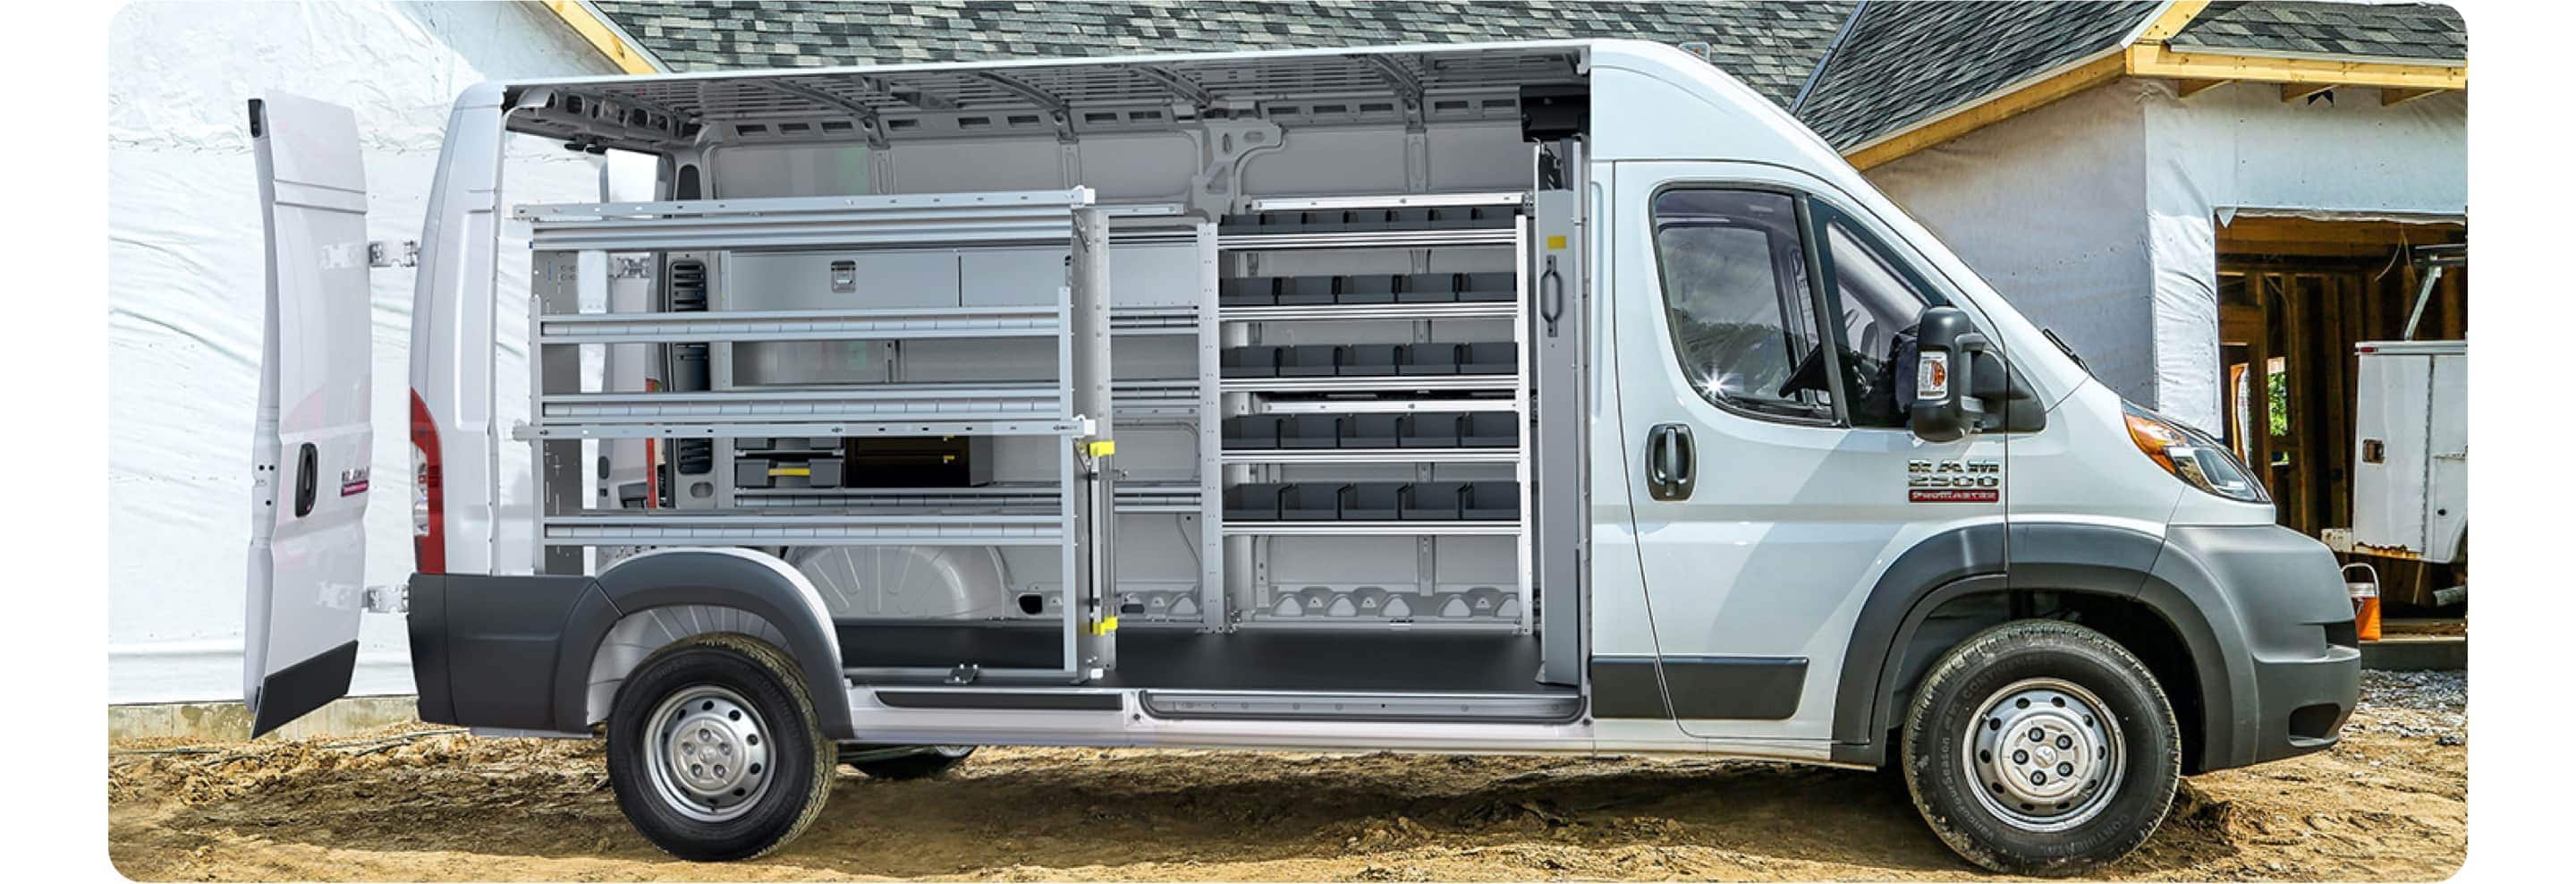 2021 Ram Promaster Cargo Dimensions, Dodge Promaster Shelving Systems